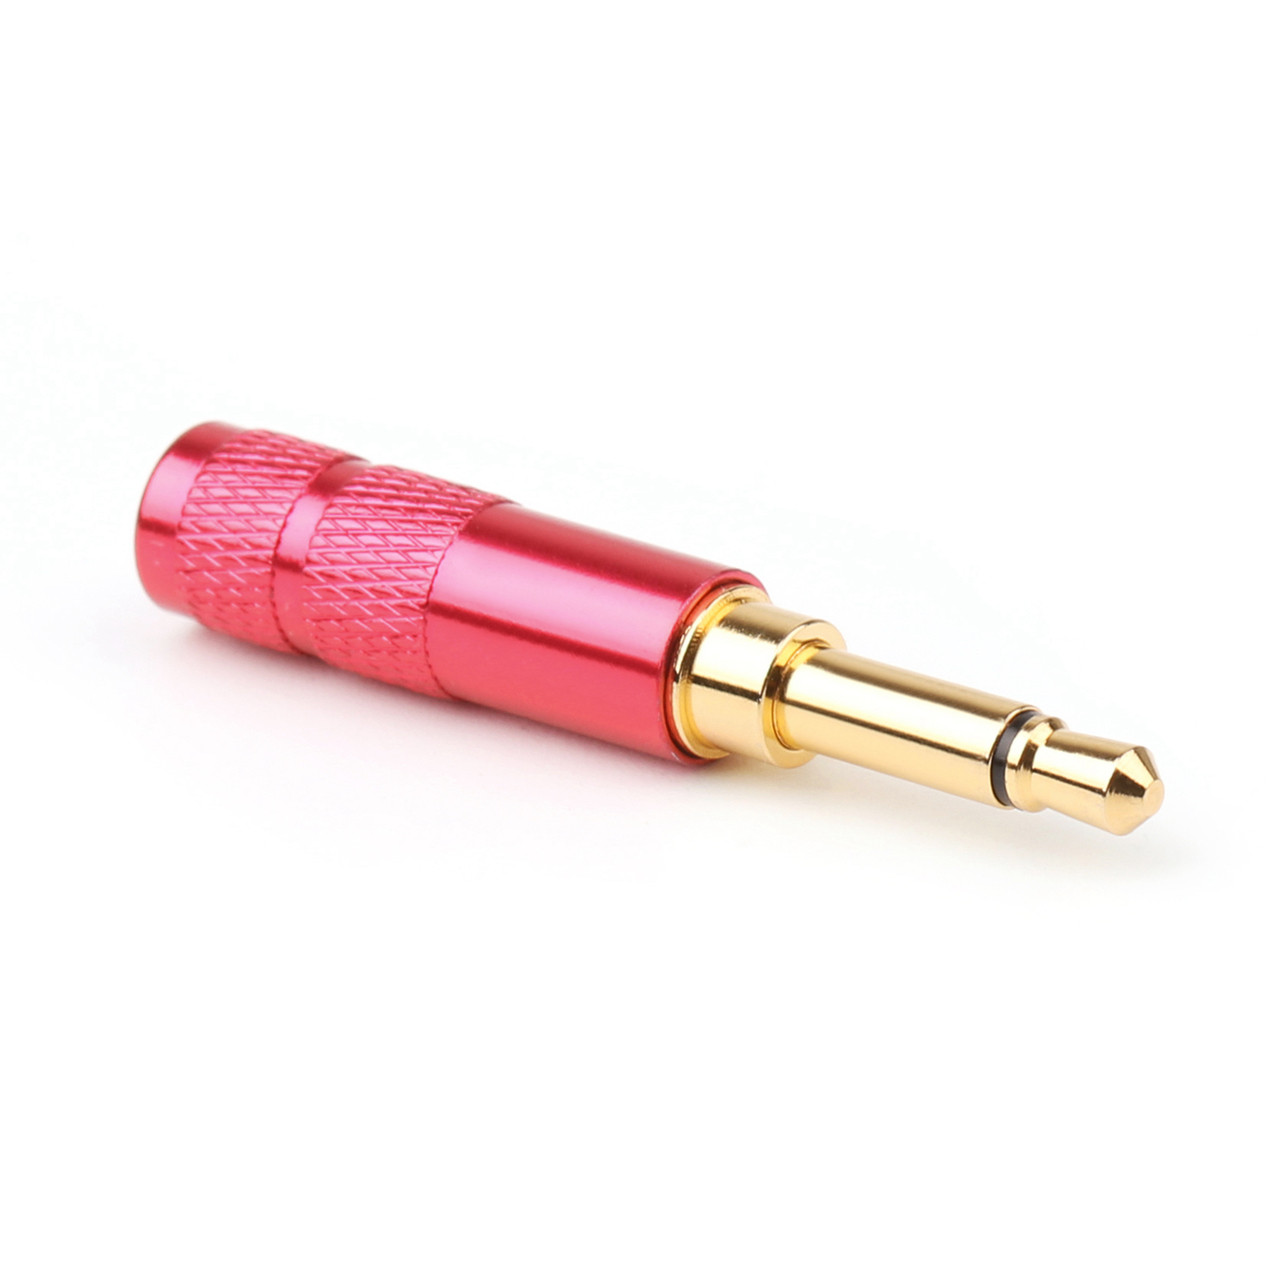 1PC 3.5mm 2 Pole TS Mono Plug Male MINI Connector For Headphone Adapter, Red